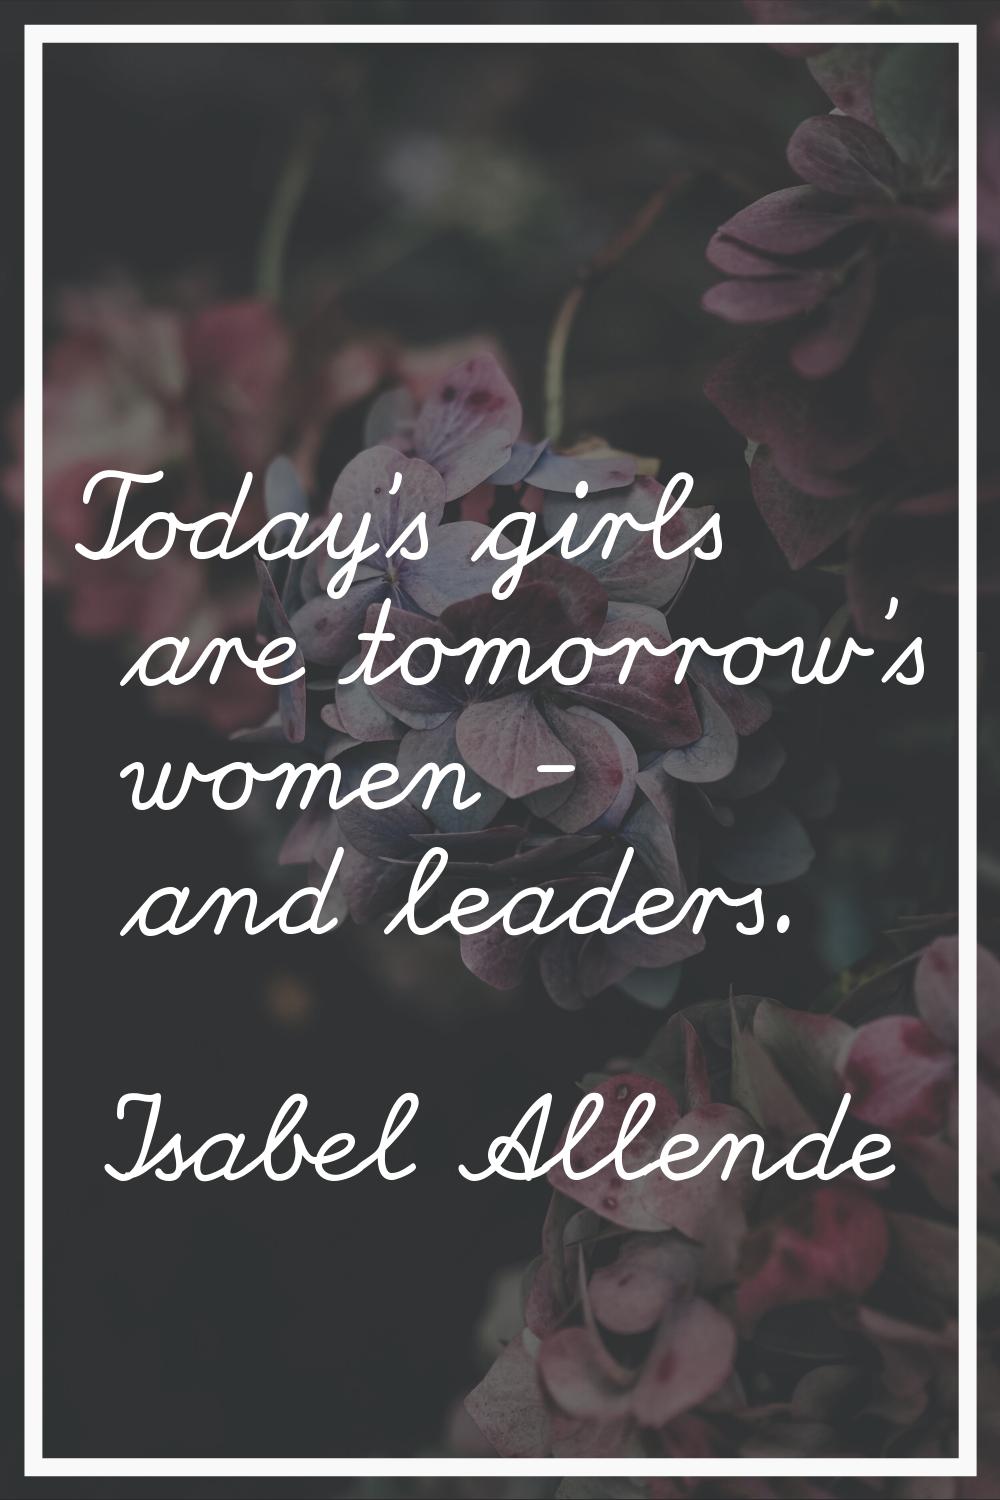 Today's girls are tomorrow's women - and leaders.